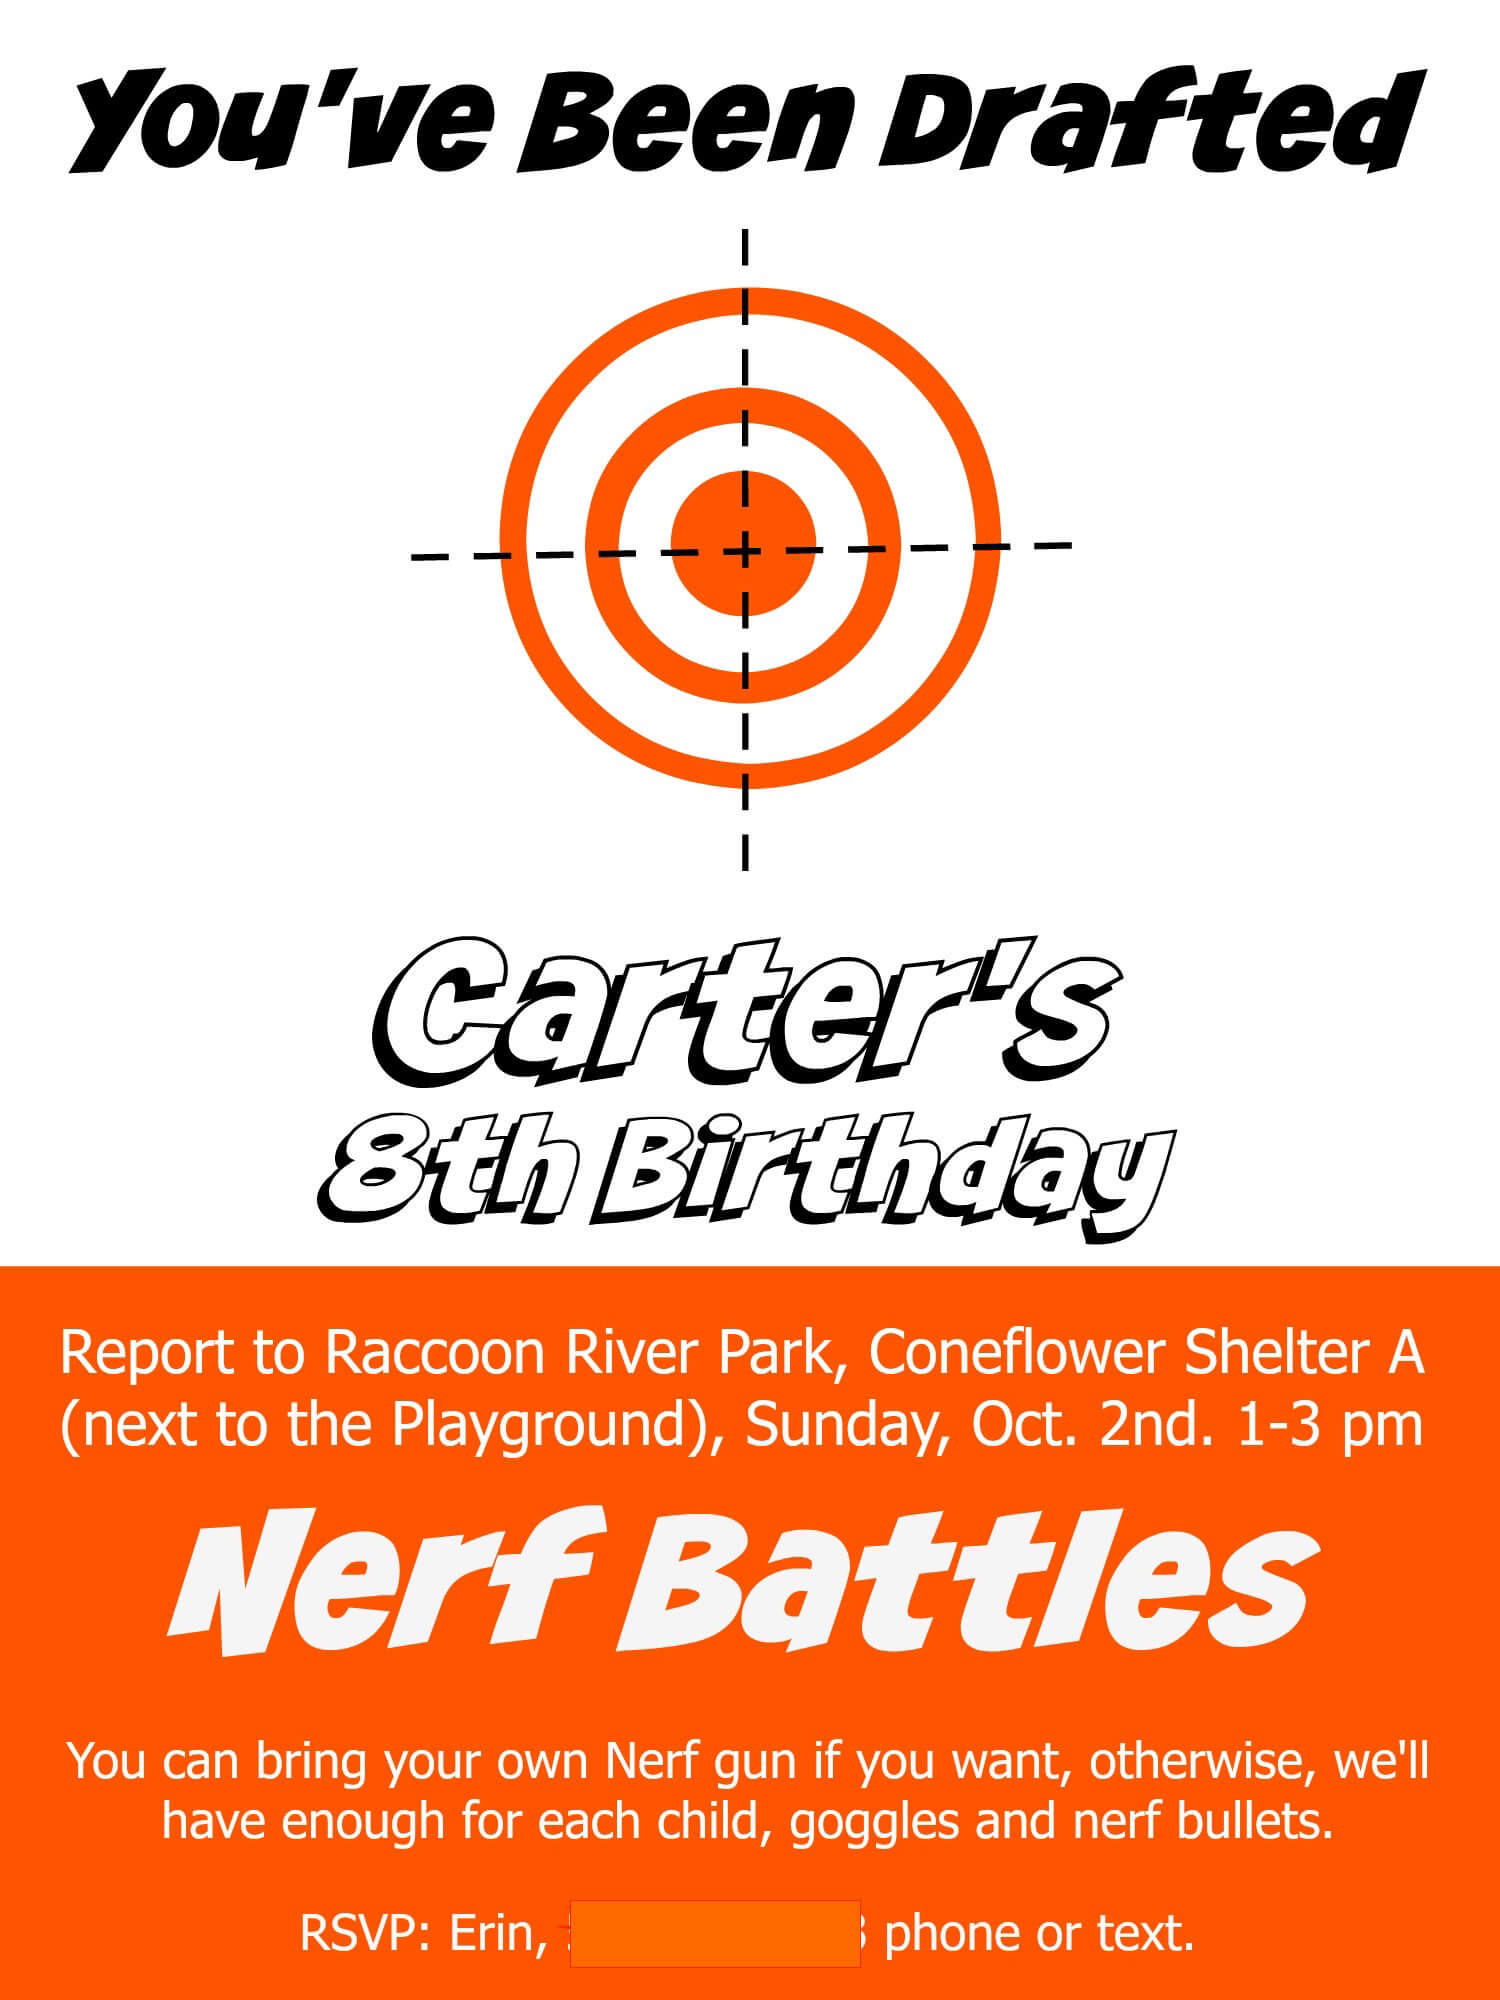 Nerf Birthday Party Invitations
 The Ultimate Nerf Battle Birthday Party Sometimes Homemade